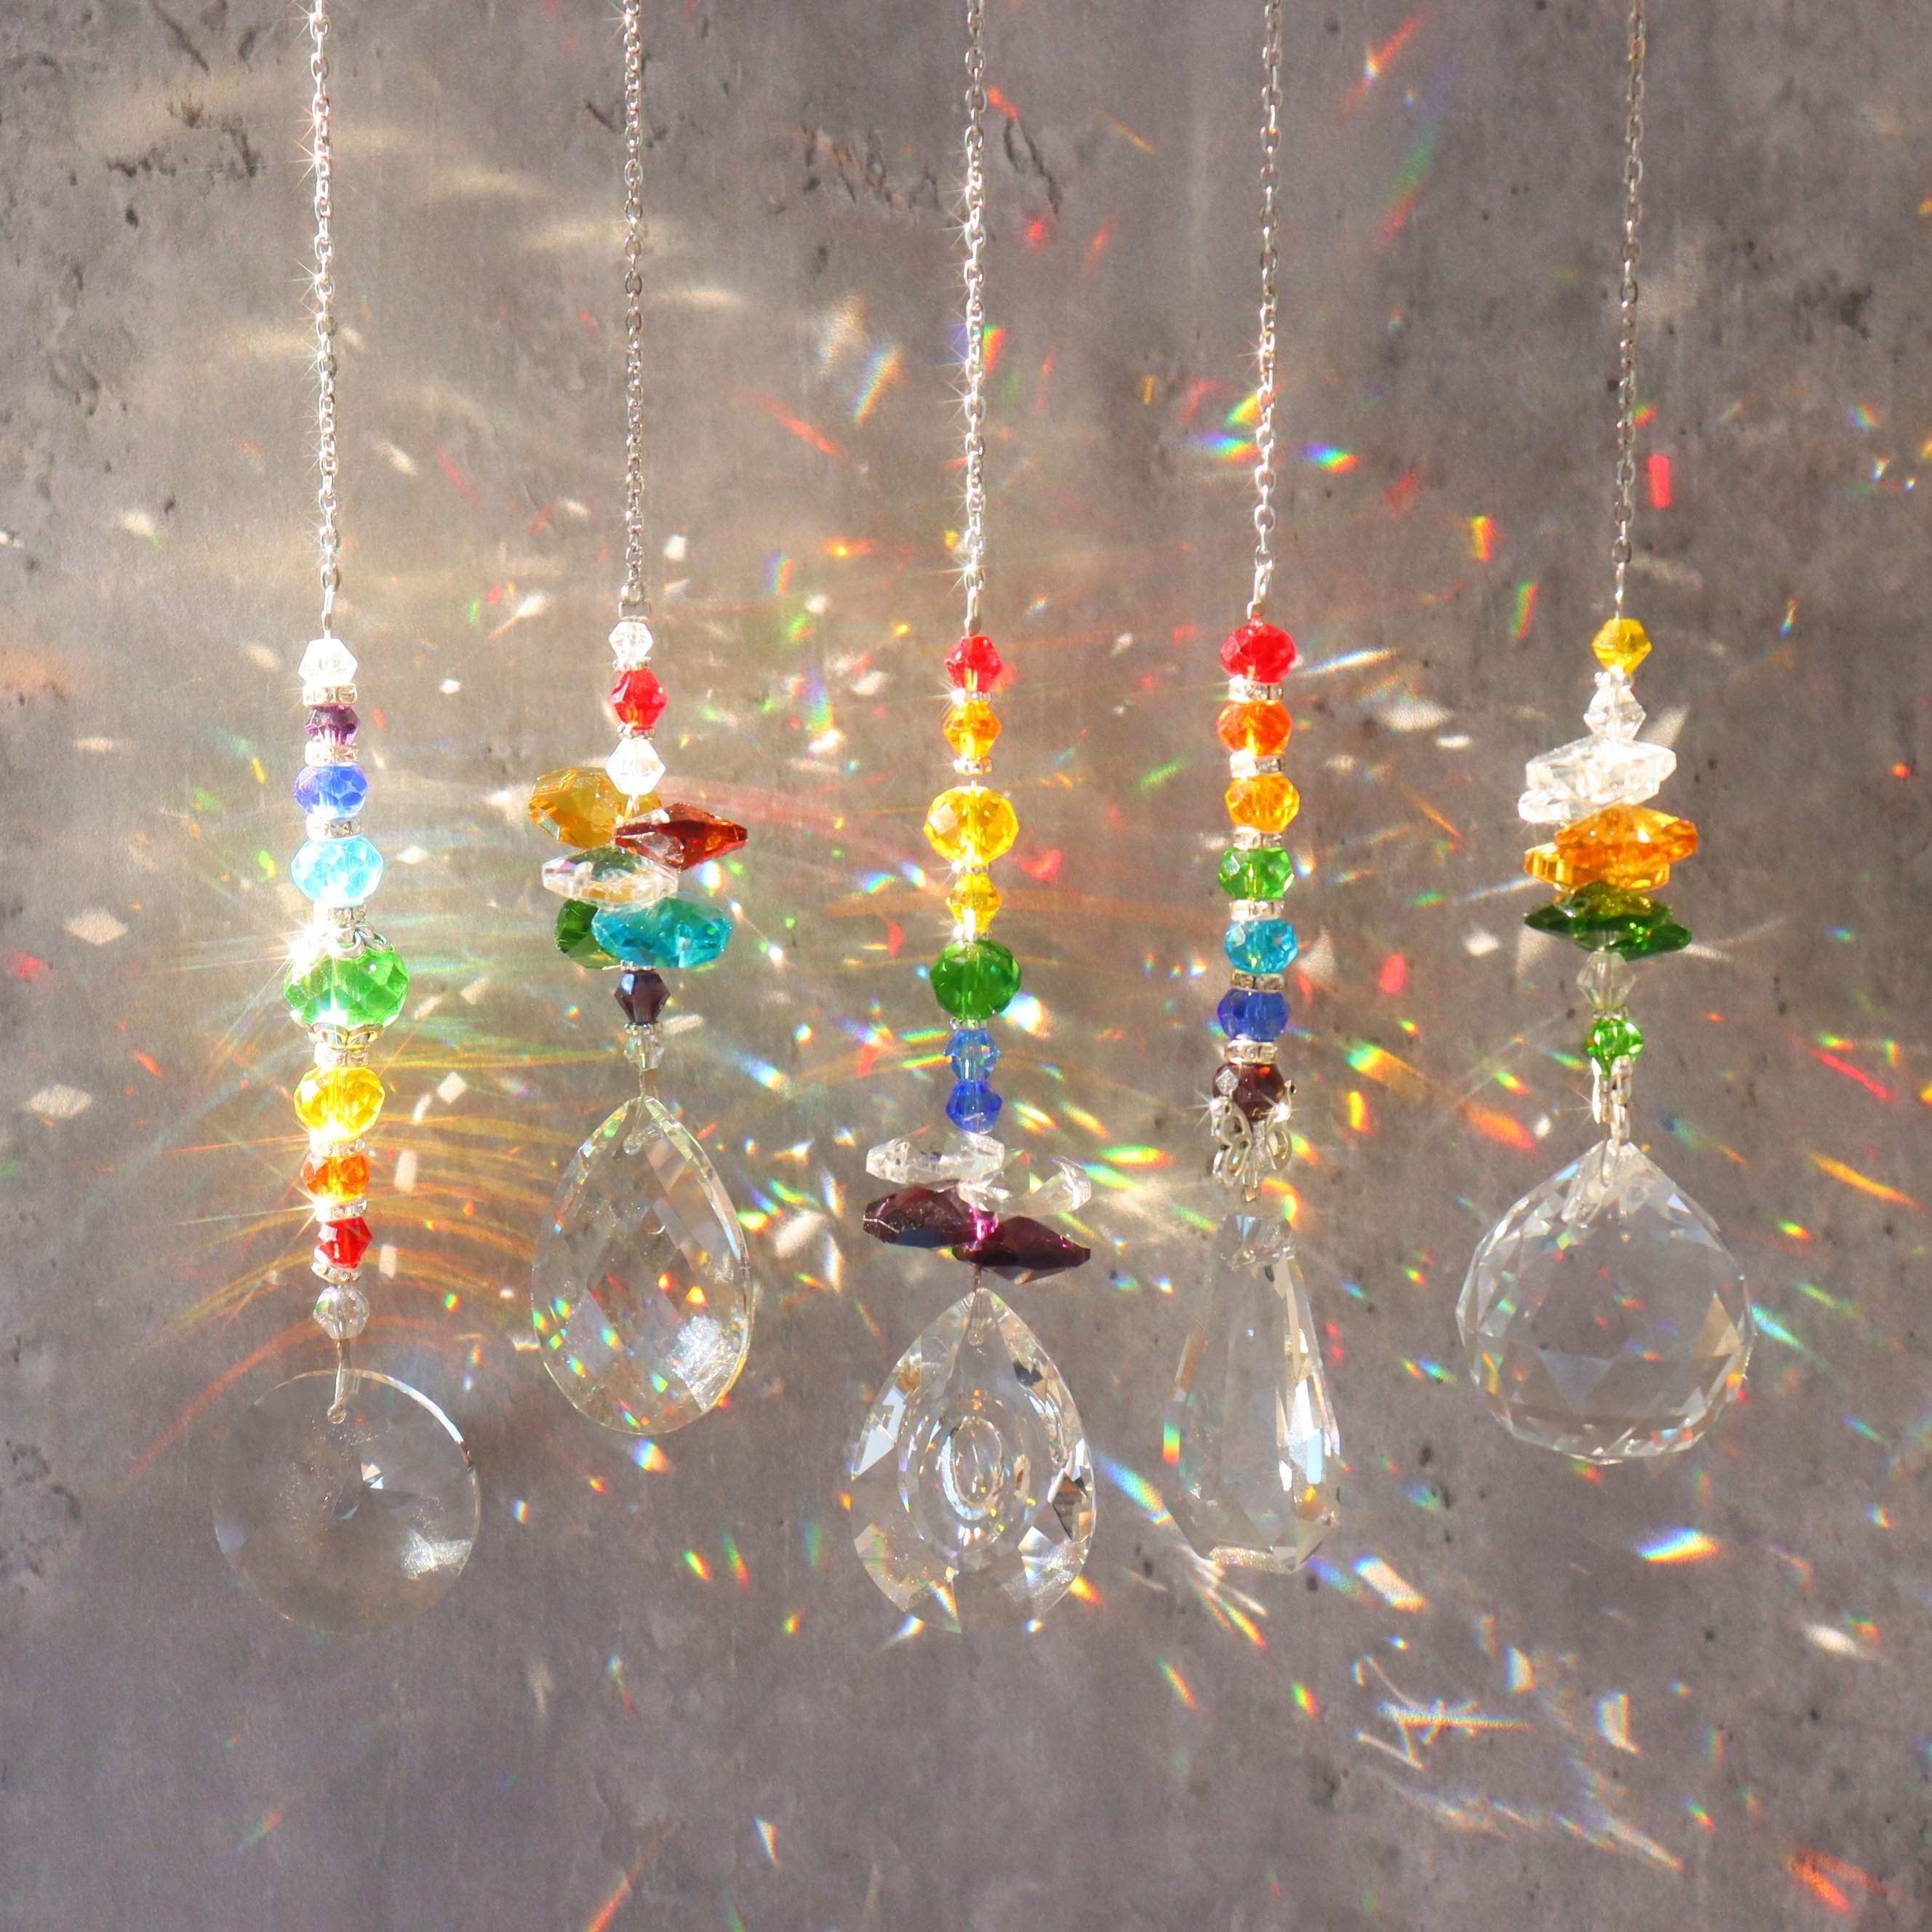 

5 Pcs Colored Crystal Hanging Wind Chime Pendant Rainbow Maker, Ornaments For Window Home Garden Lamp Car Valentine's Day Christmas Party Decoration